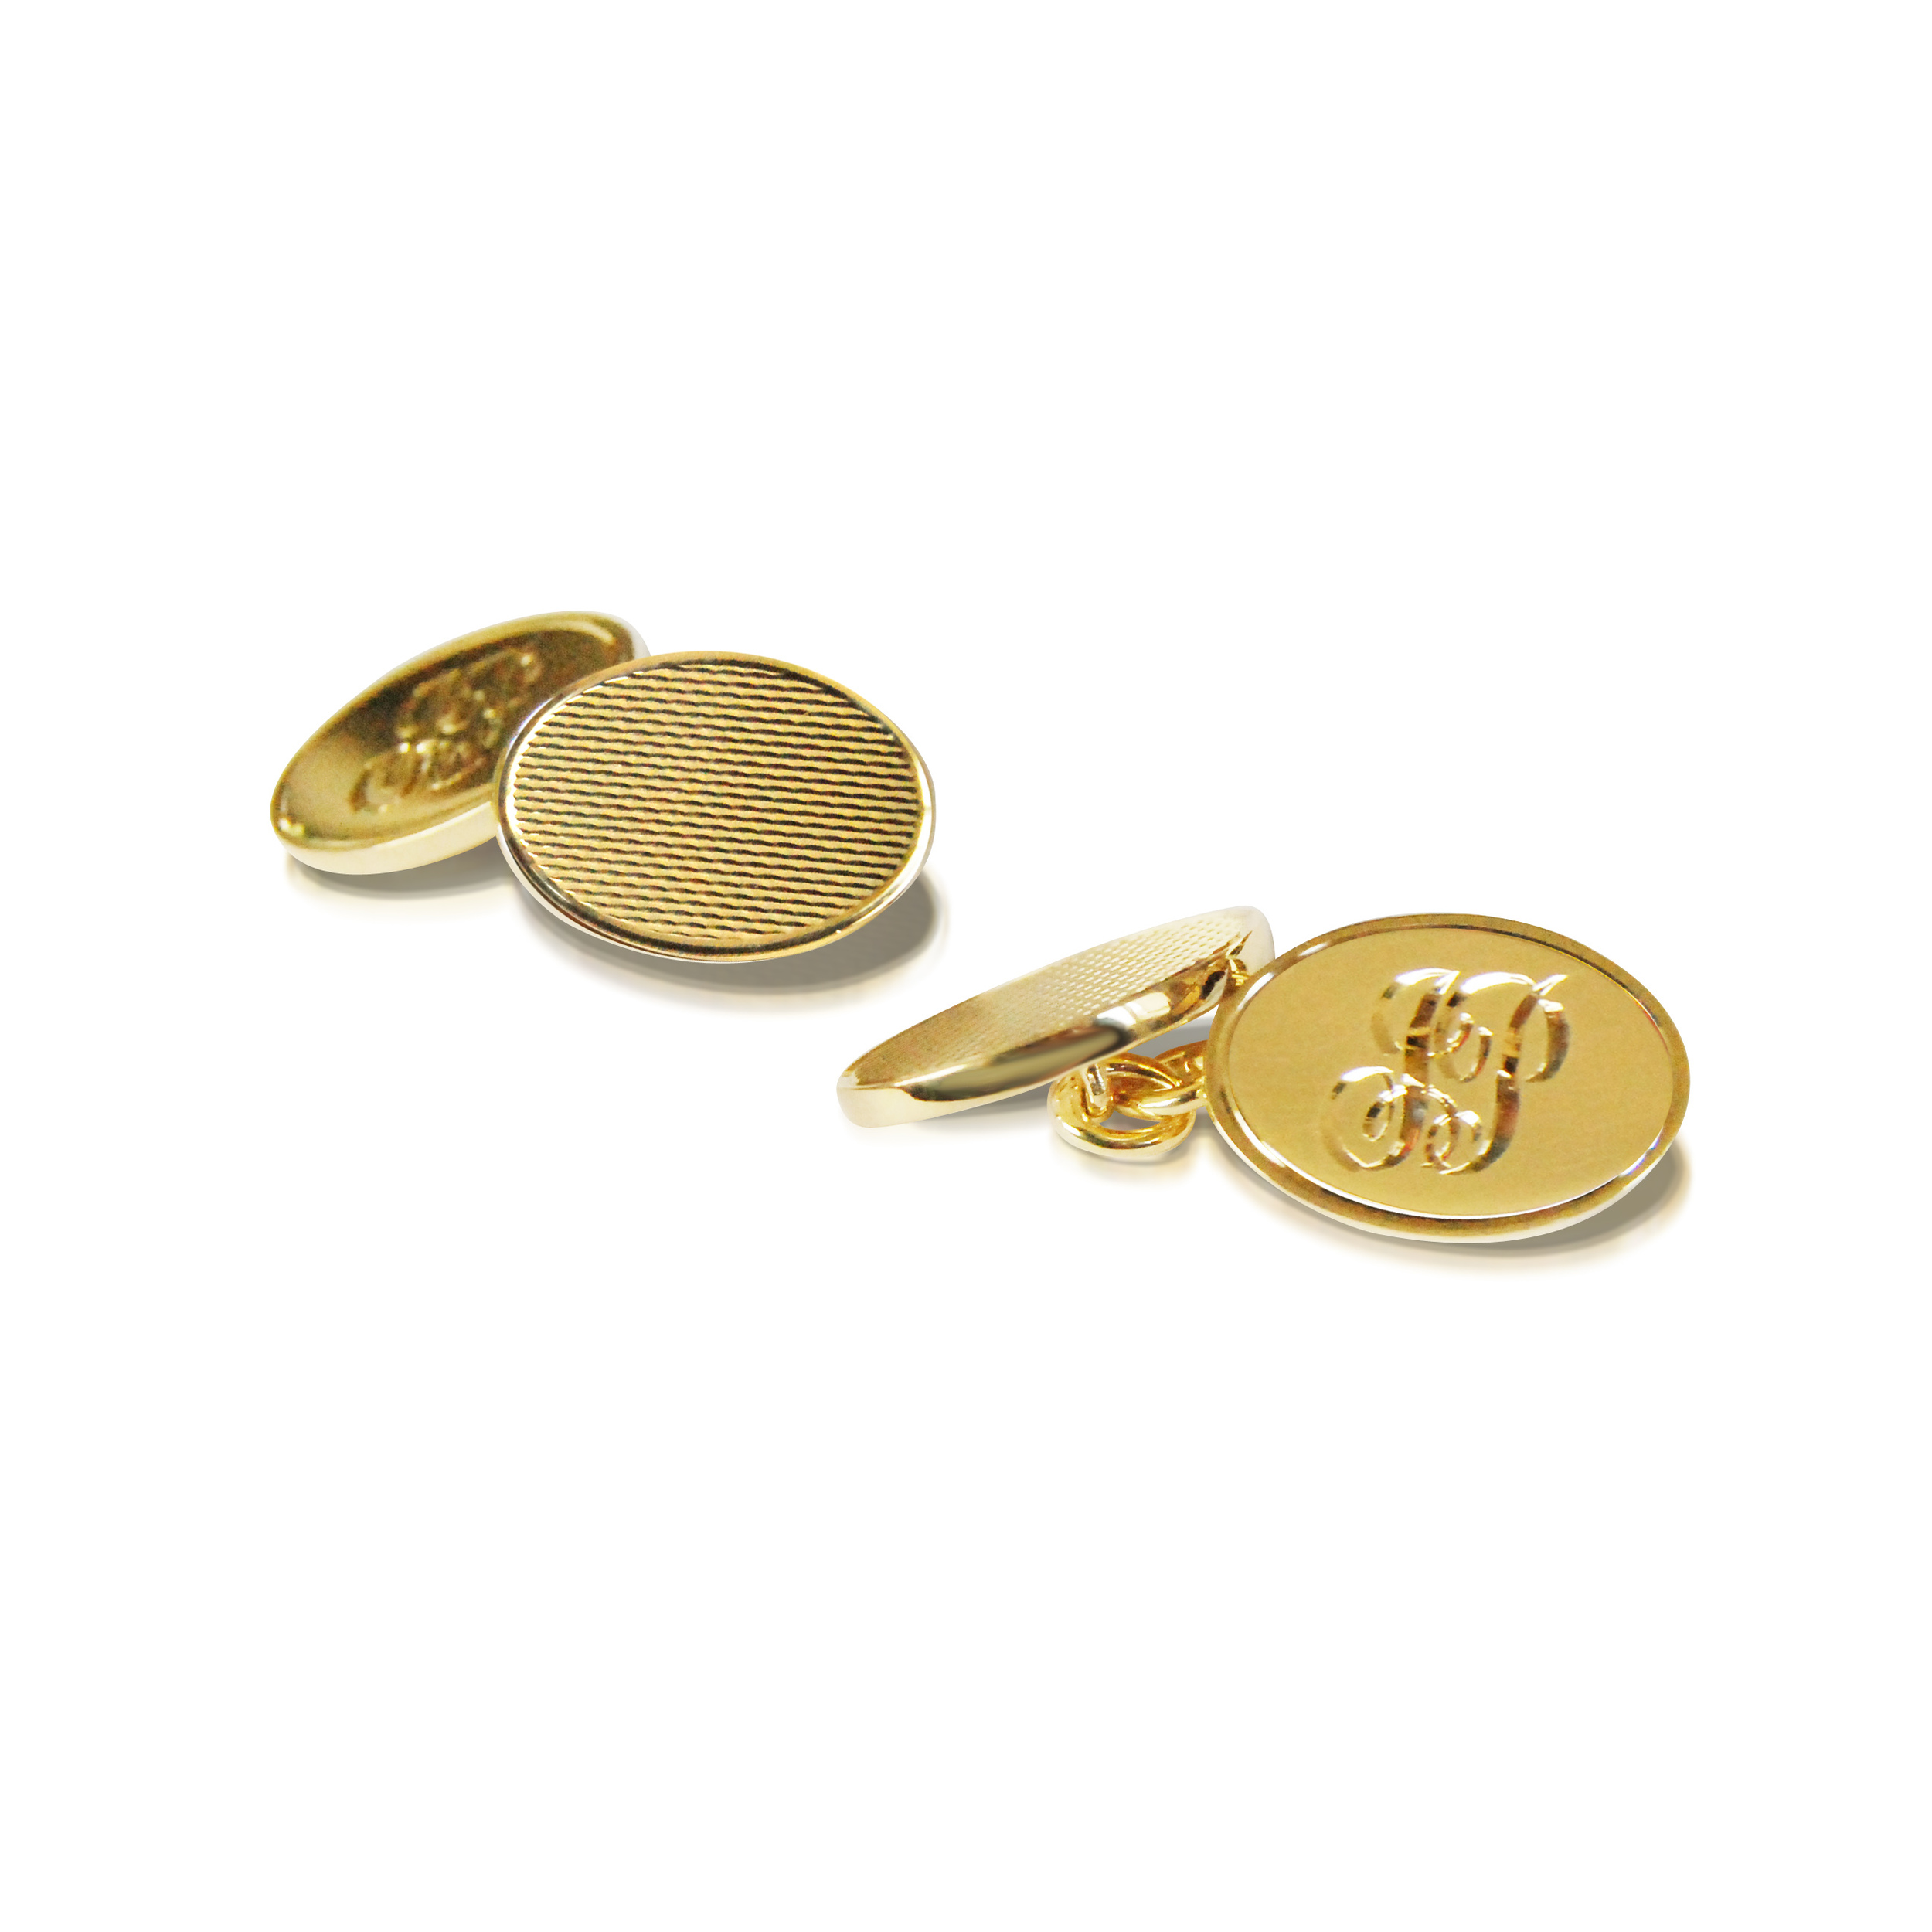 gentlemans-9ct-yellow-gold-cufflinks-with-engine-turned-detail-and-engraved-initials-2.jpg